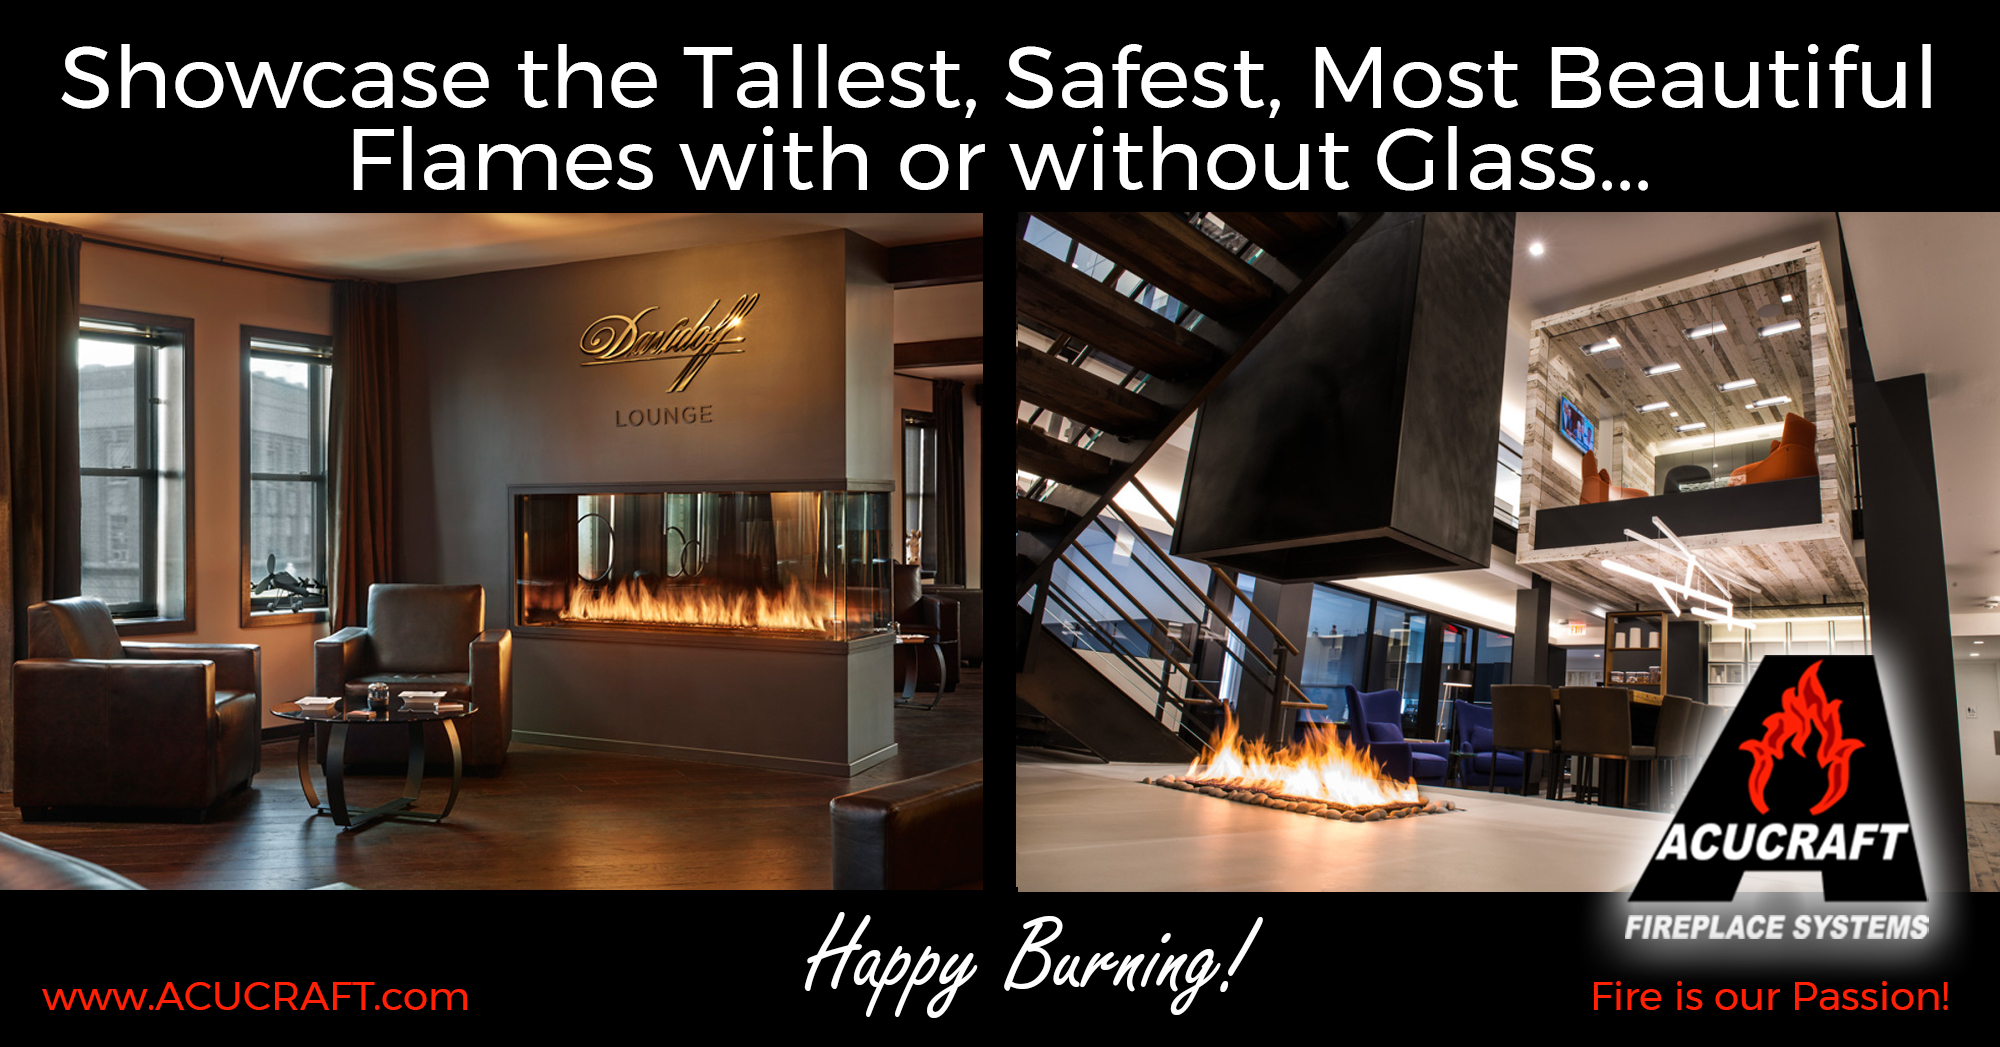 Showcase the tallest safest most beautiful flames with or without glass